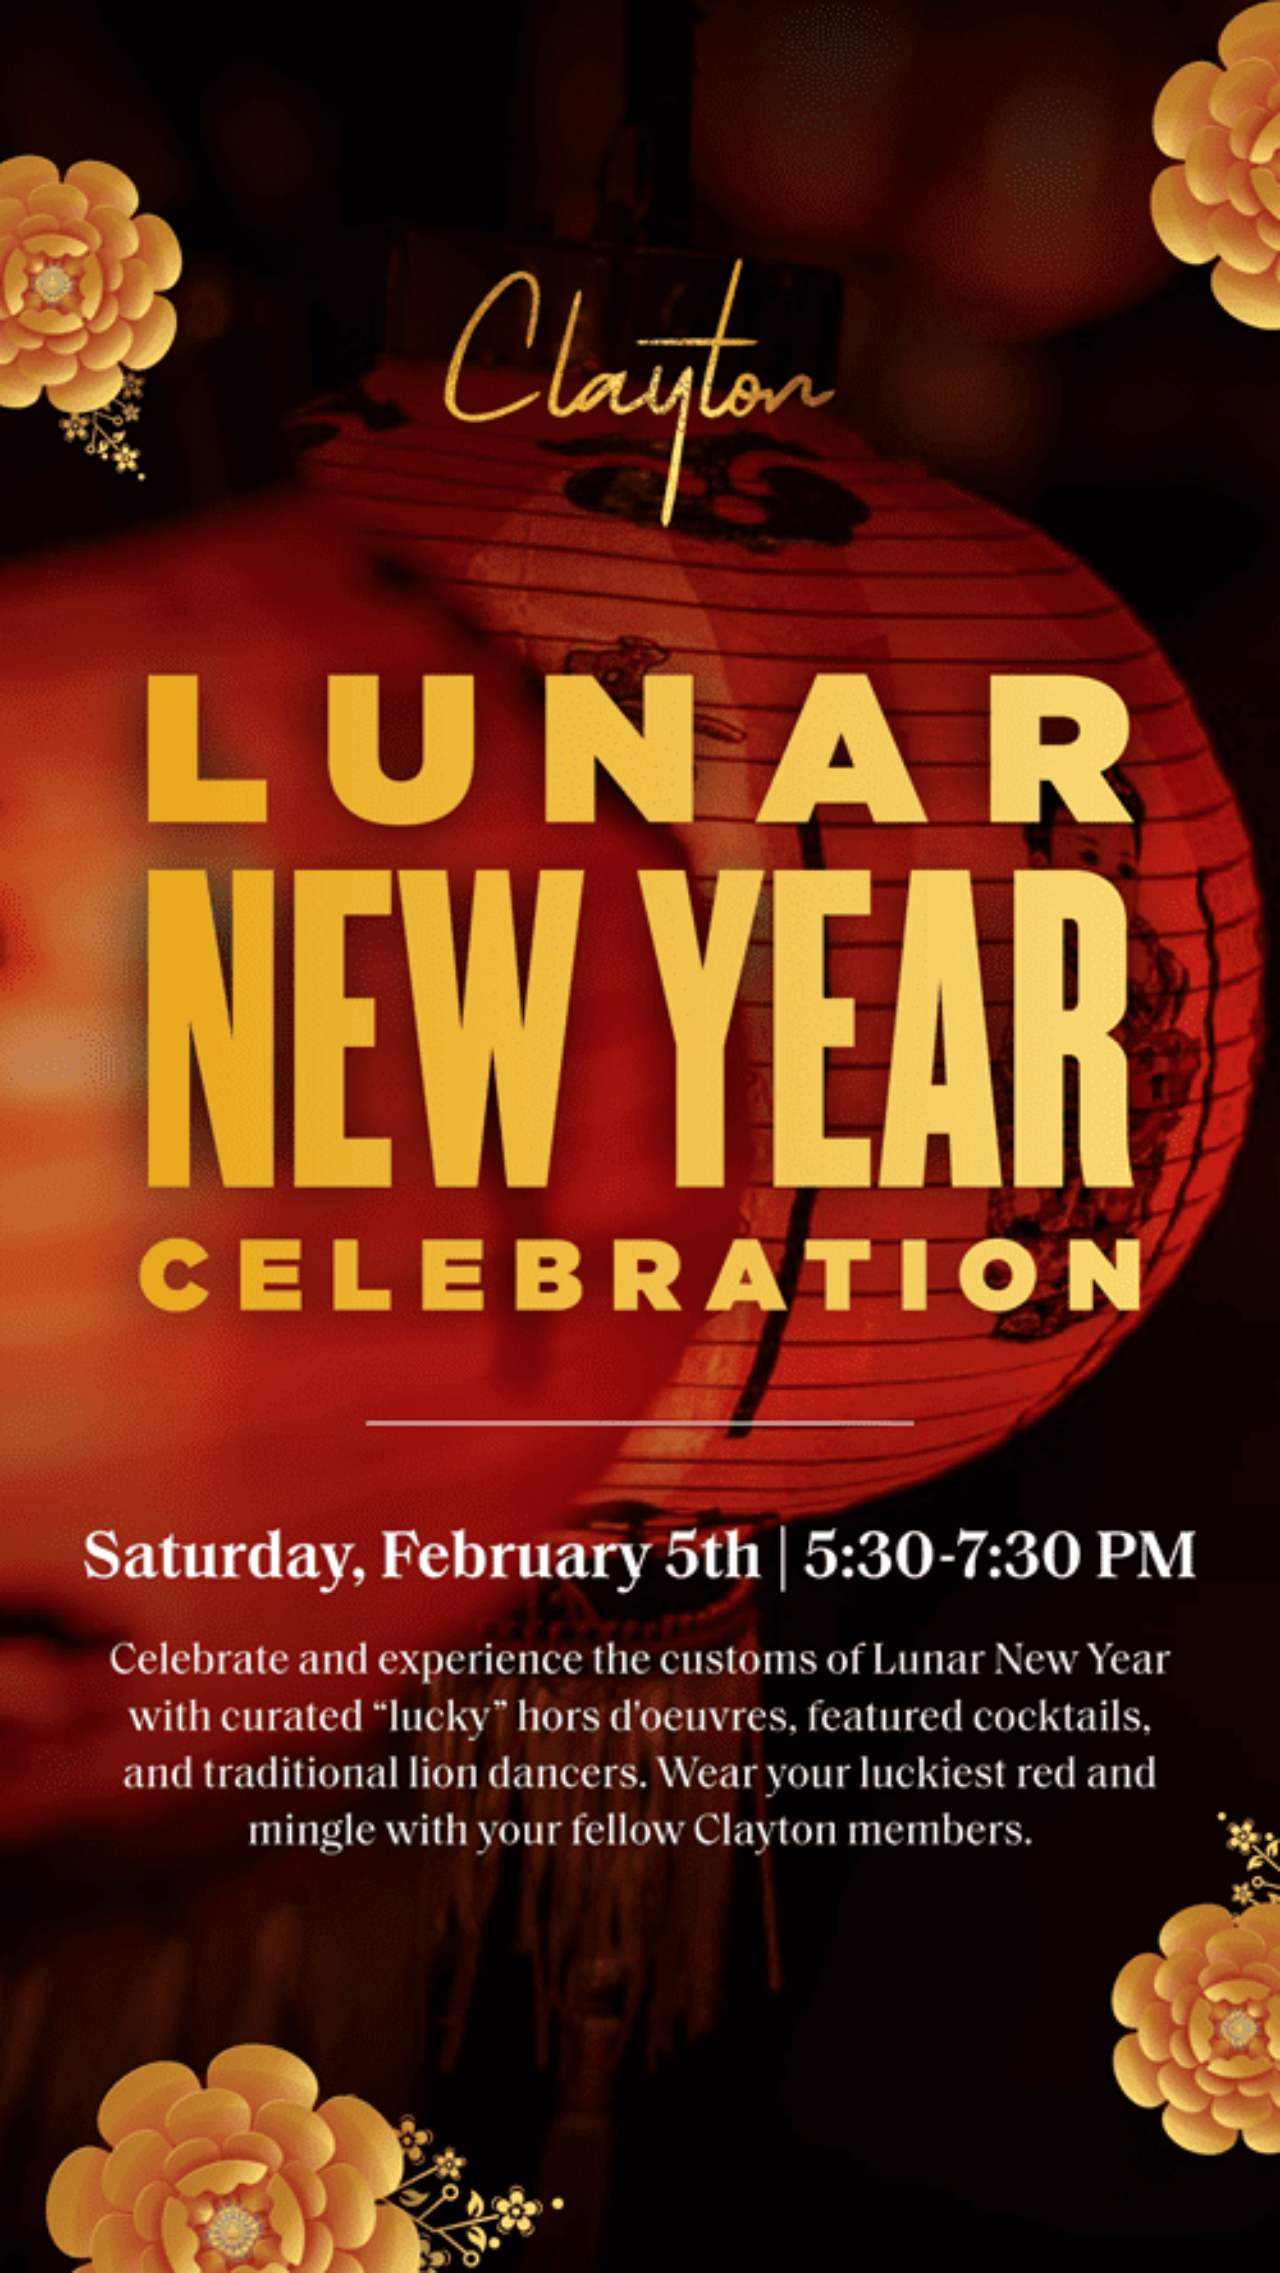 Lunar New Year Celebration flyer with red lanterns and flowers on the side at our Hotel in Denver, Colorado